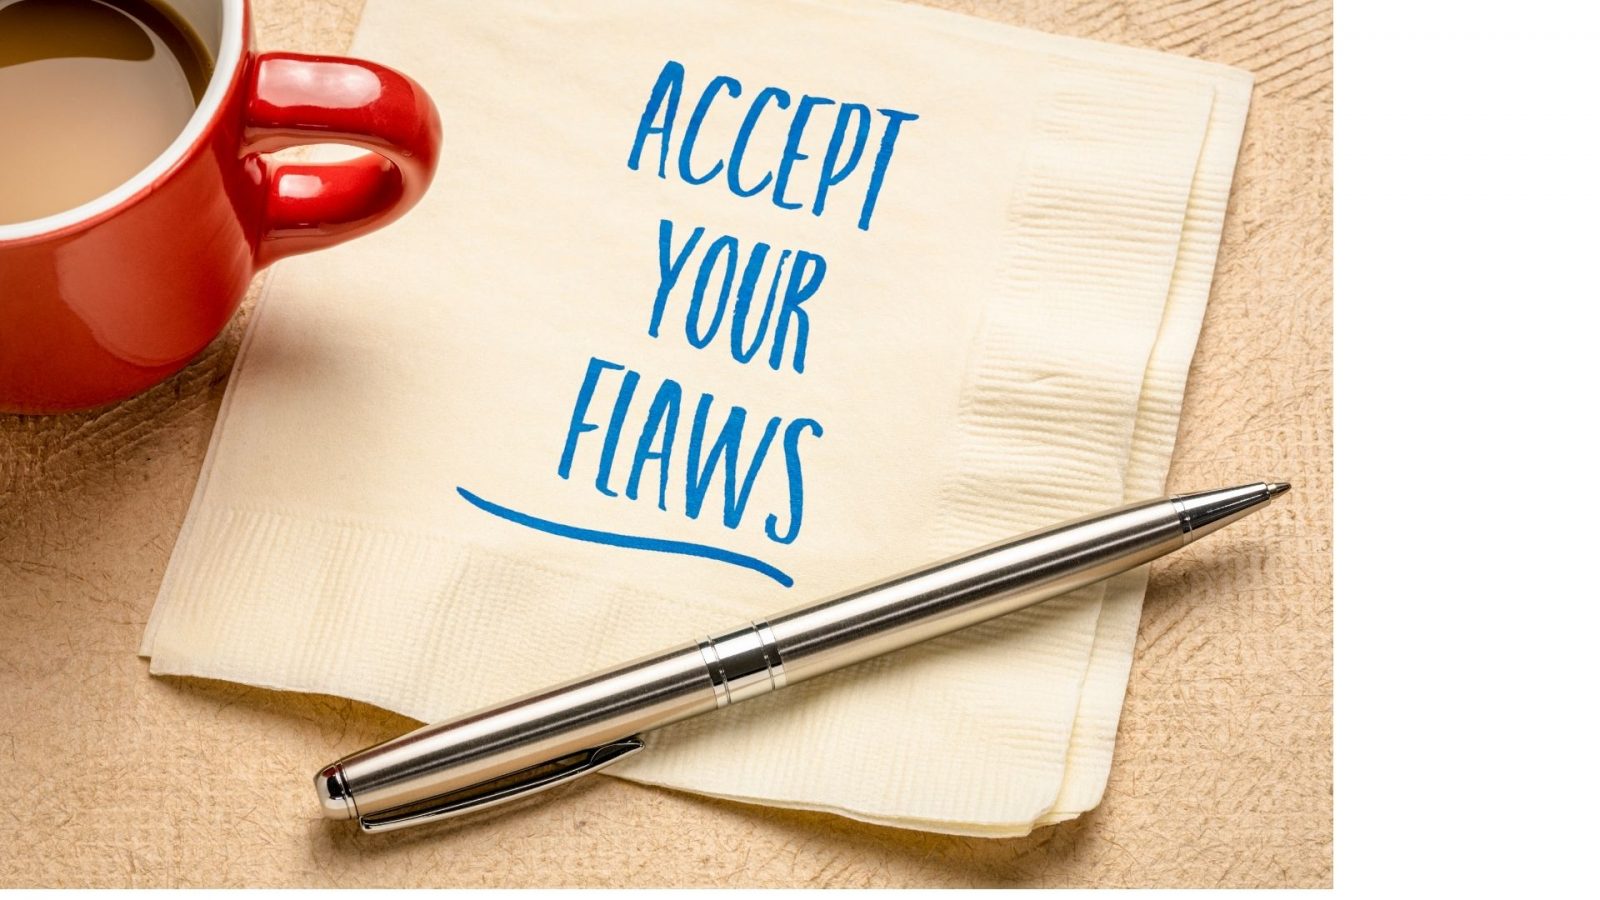 Character Flaws – Your Subtle Imperfections